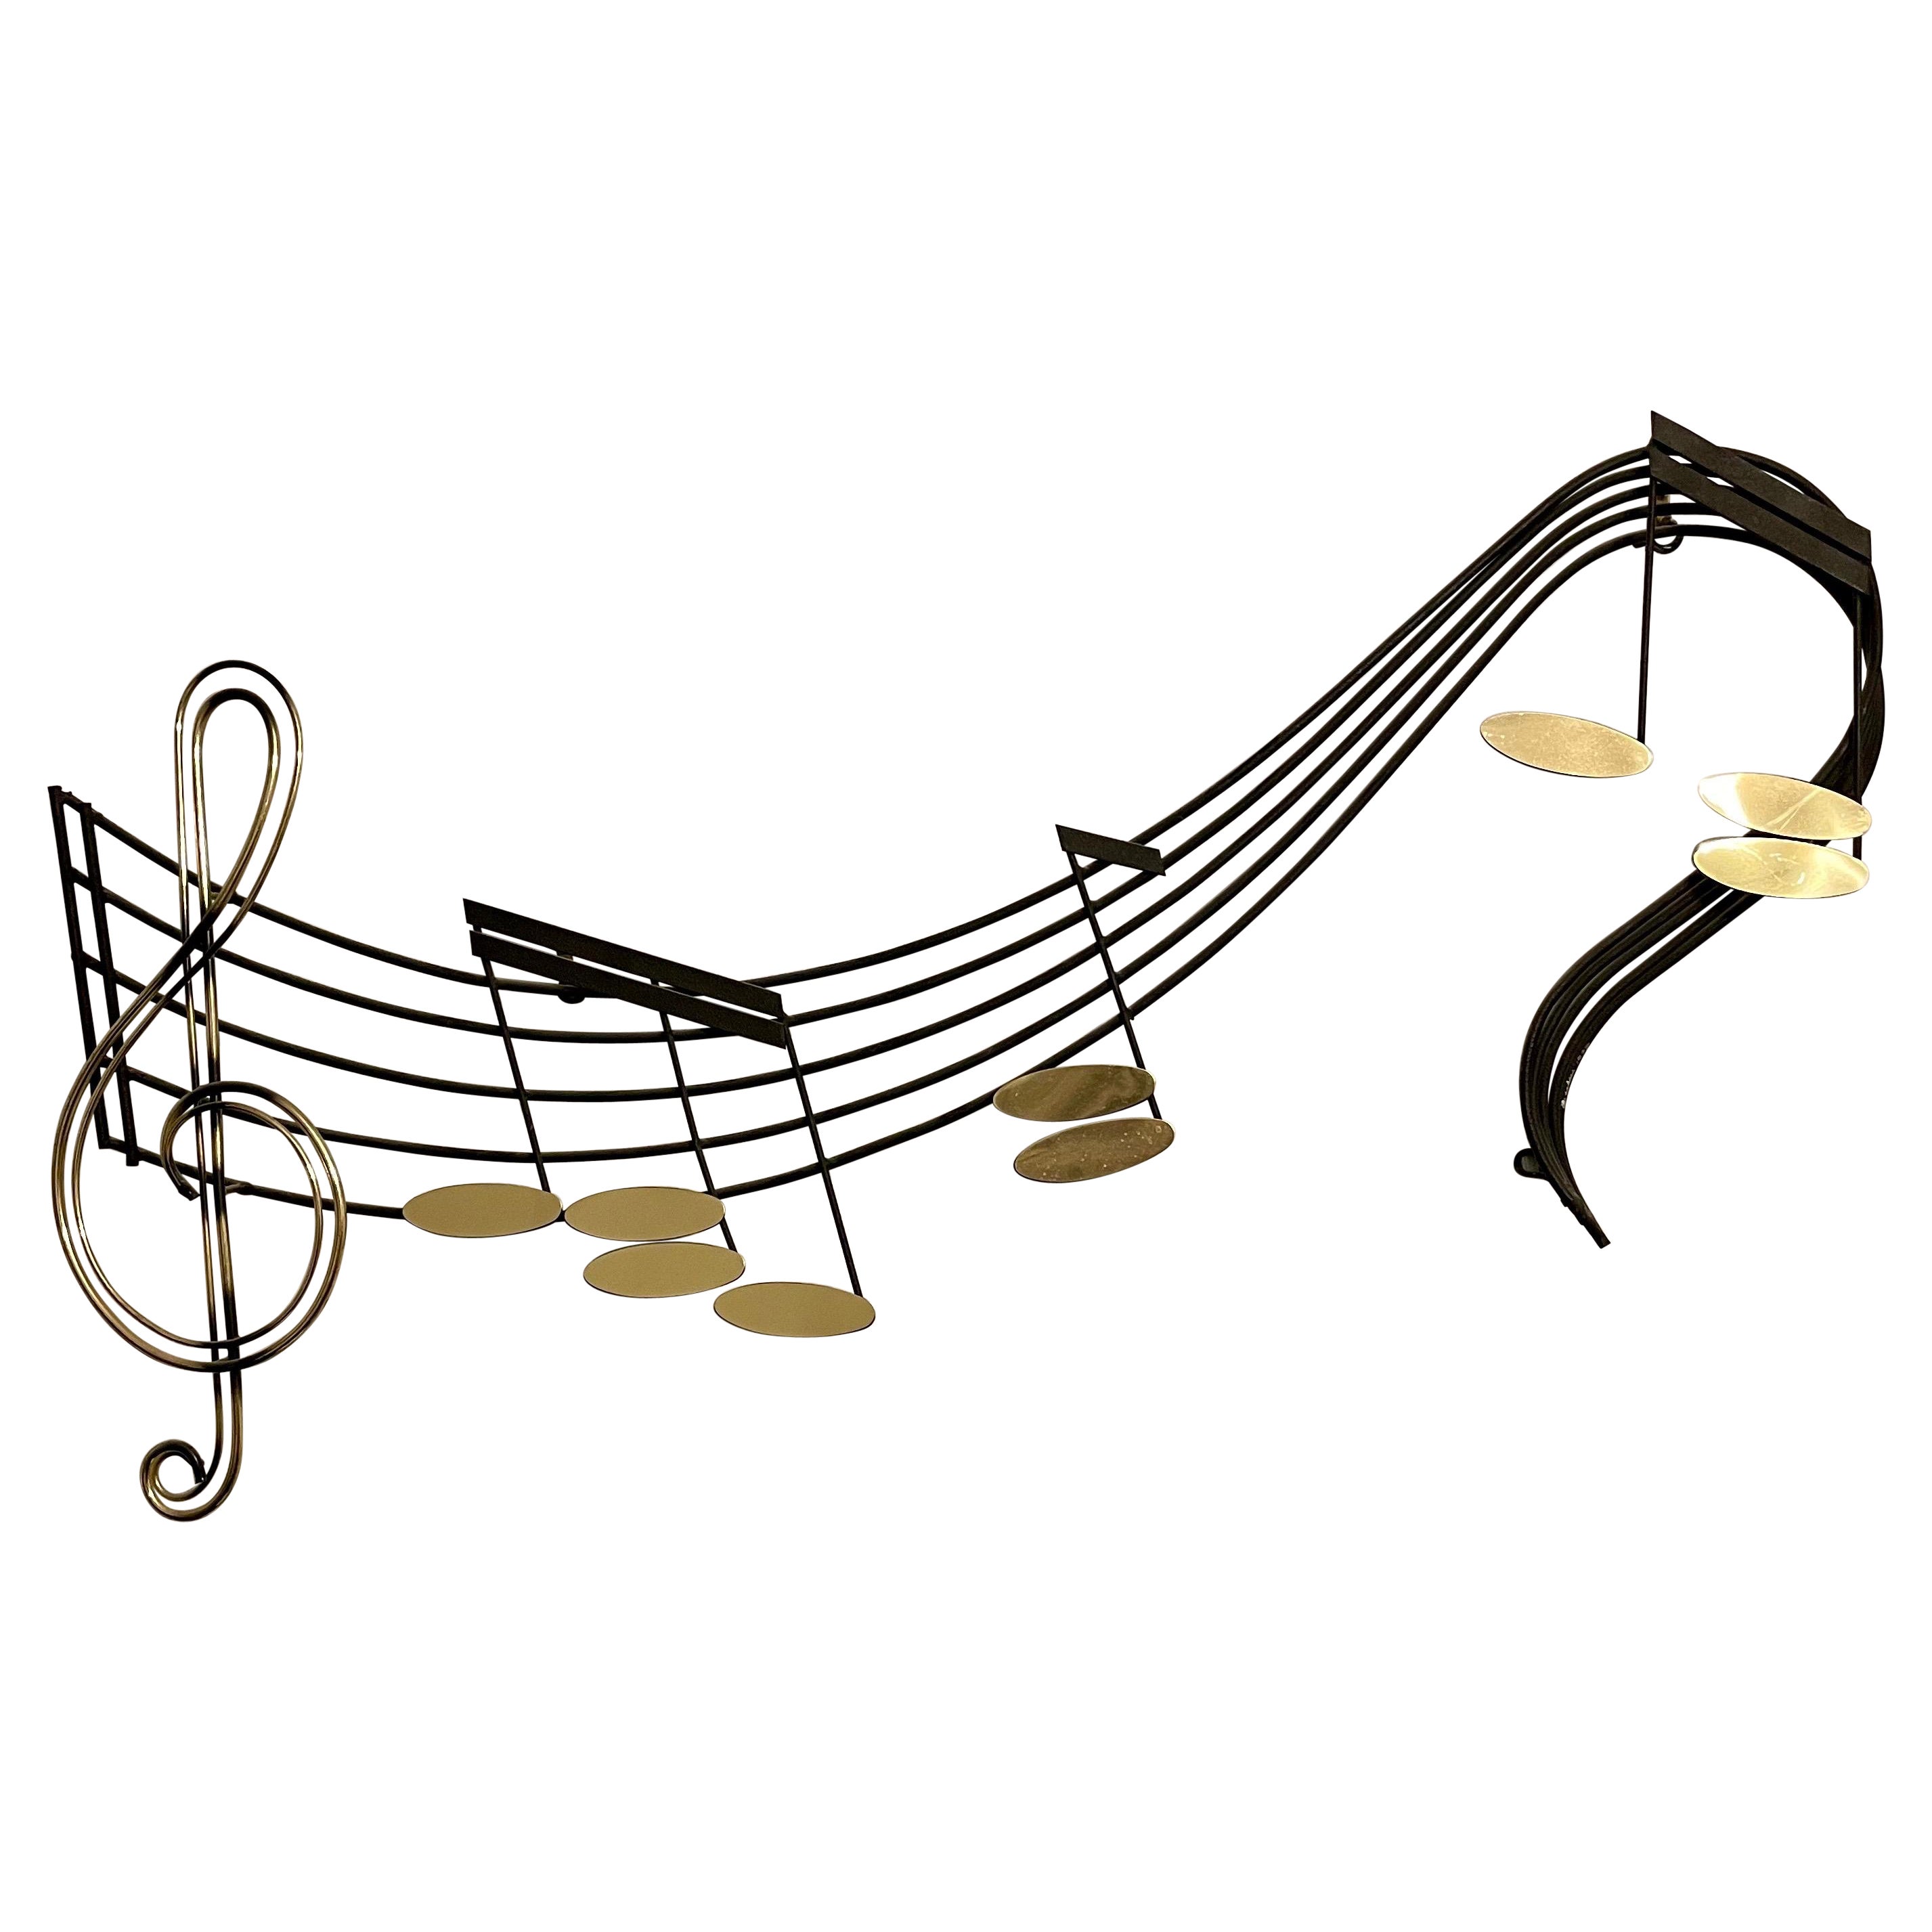 Curtis Jere Music Notes Wall Sculpture For Sale